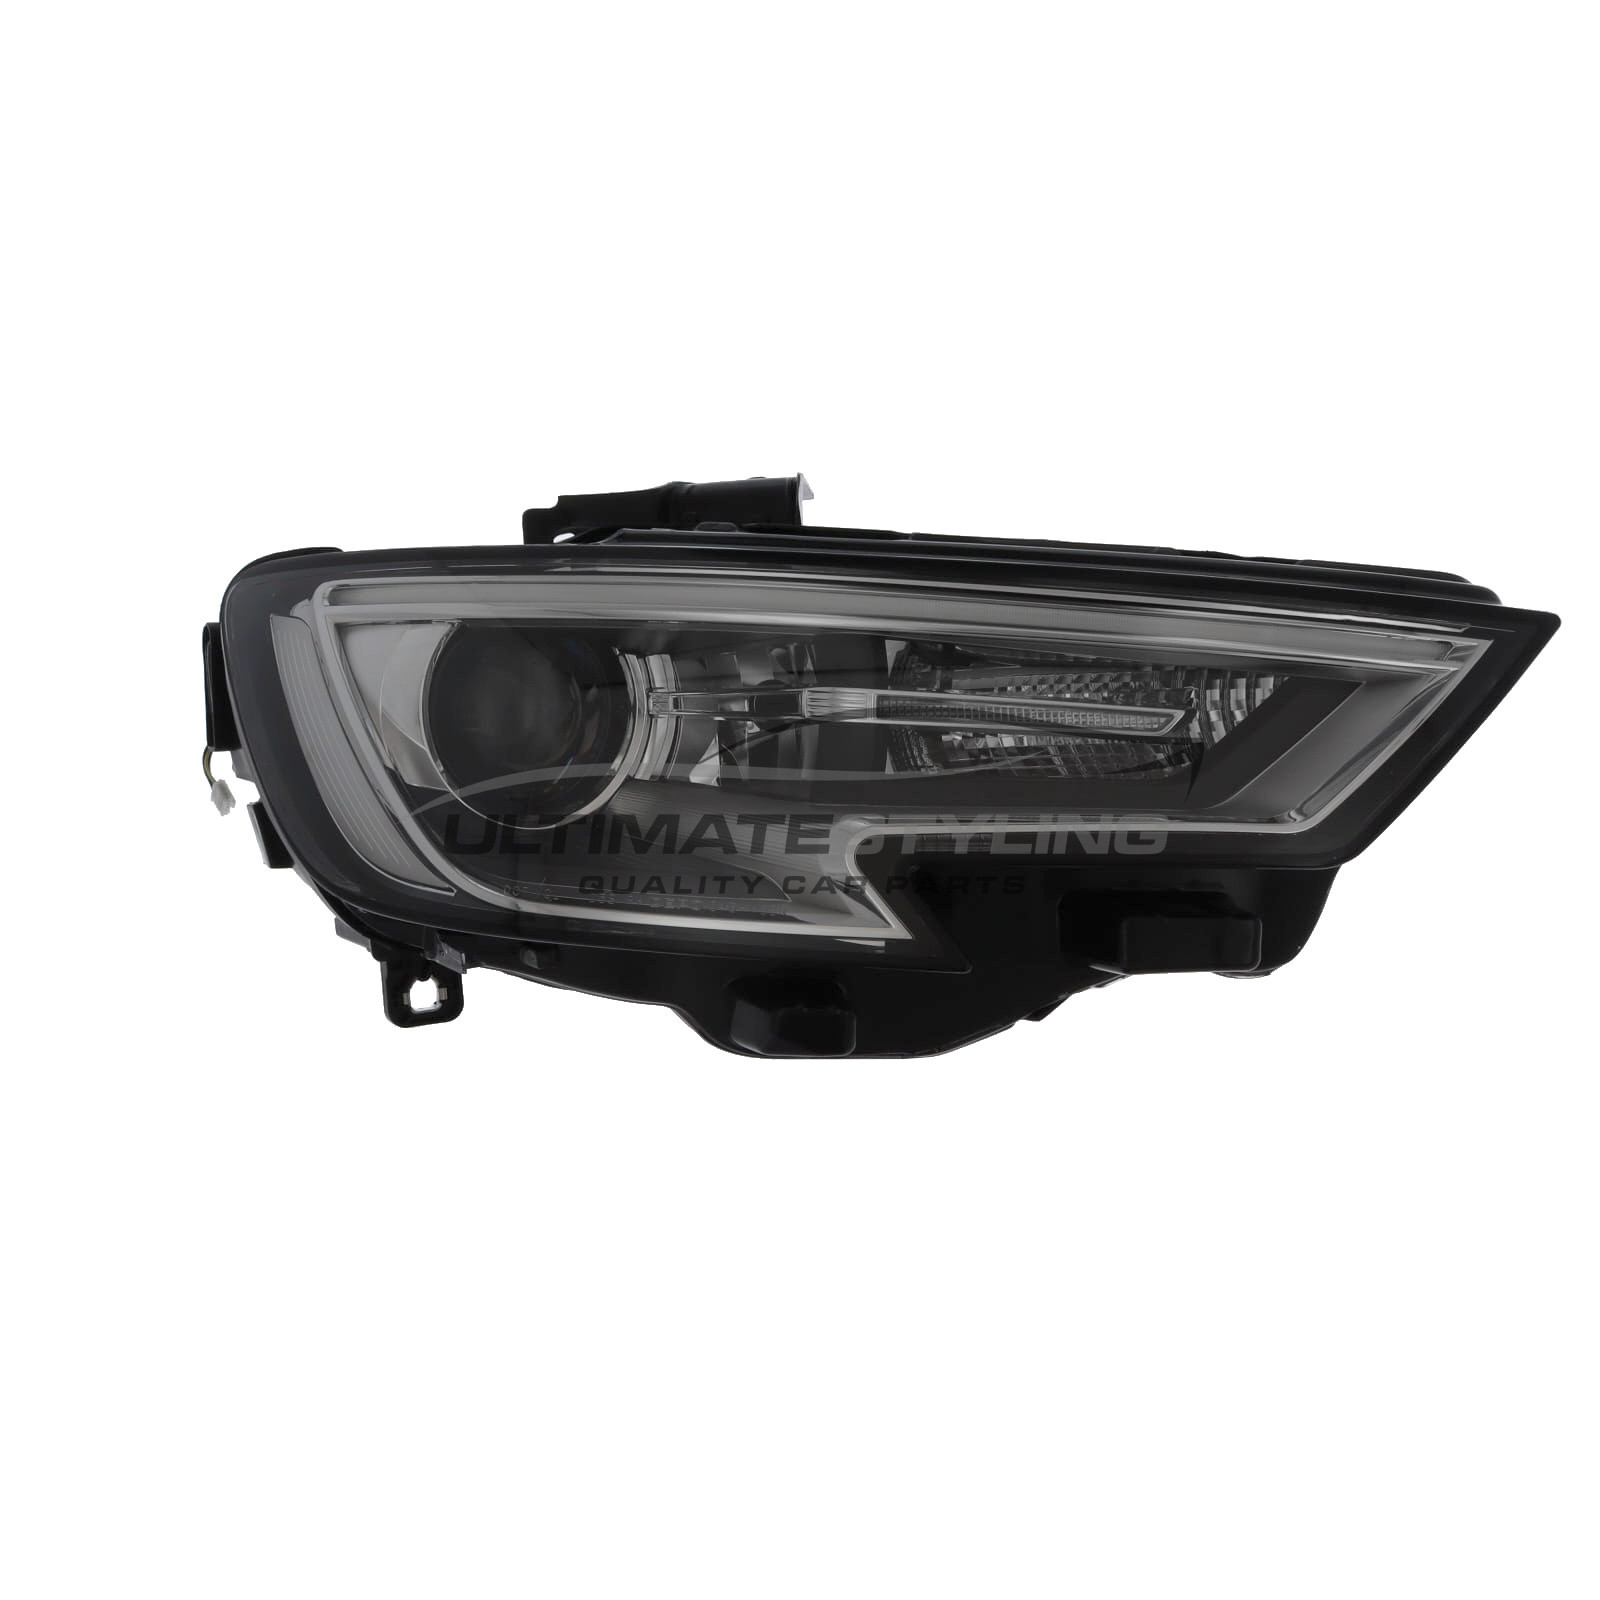 Audi A3 Headlight / Headlamp - Drivers Side (RH) - Xenon With LED Daytime Running Lamp